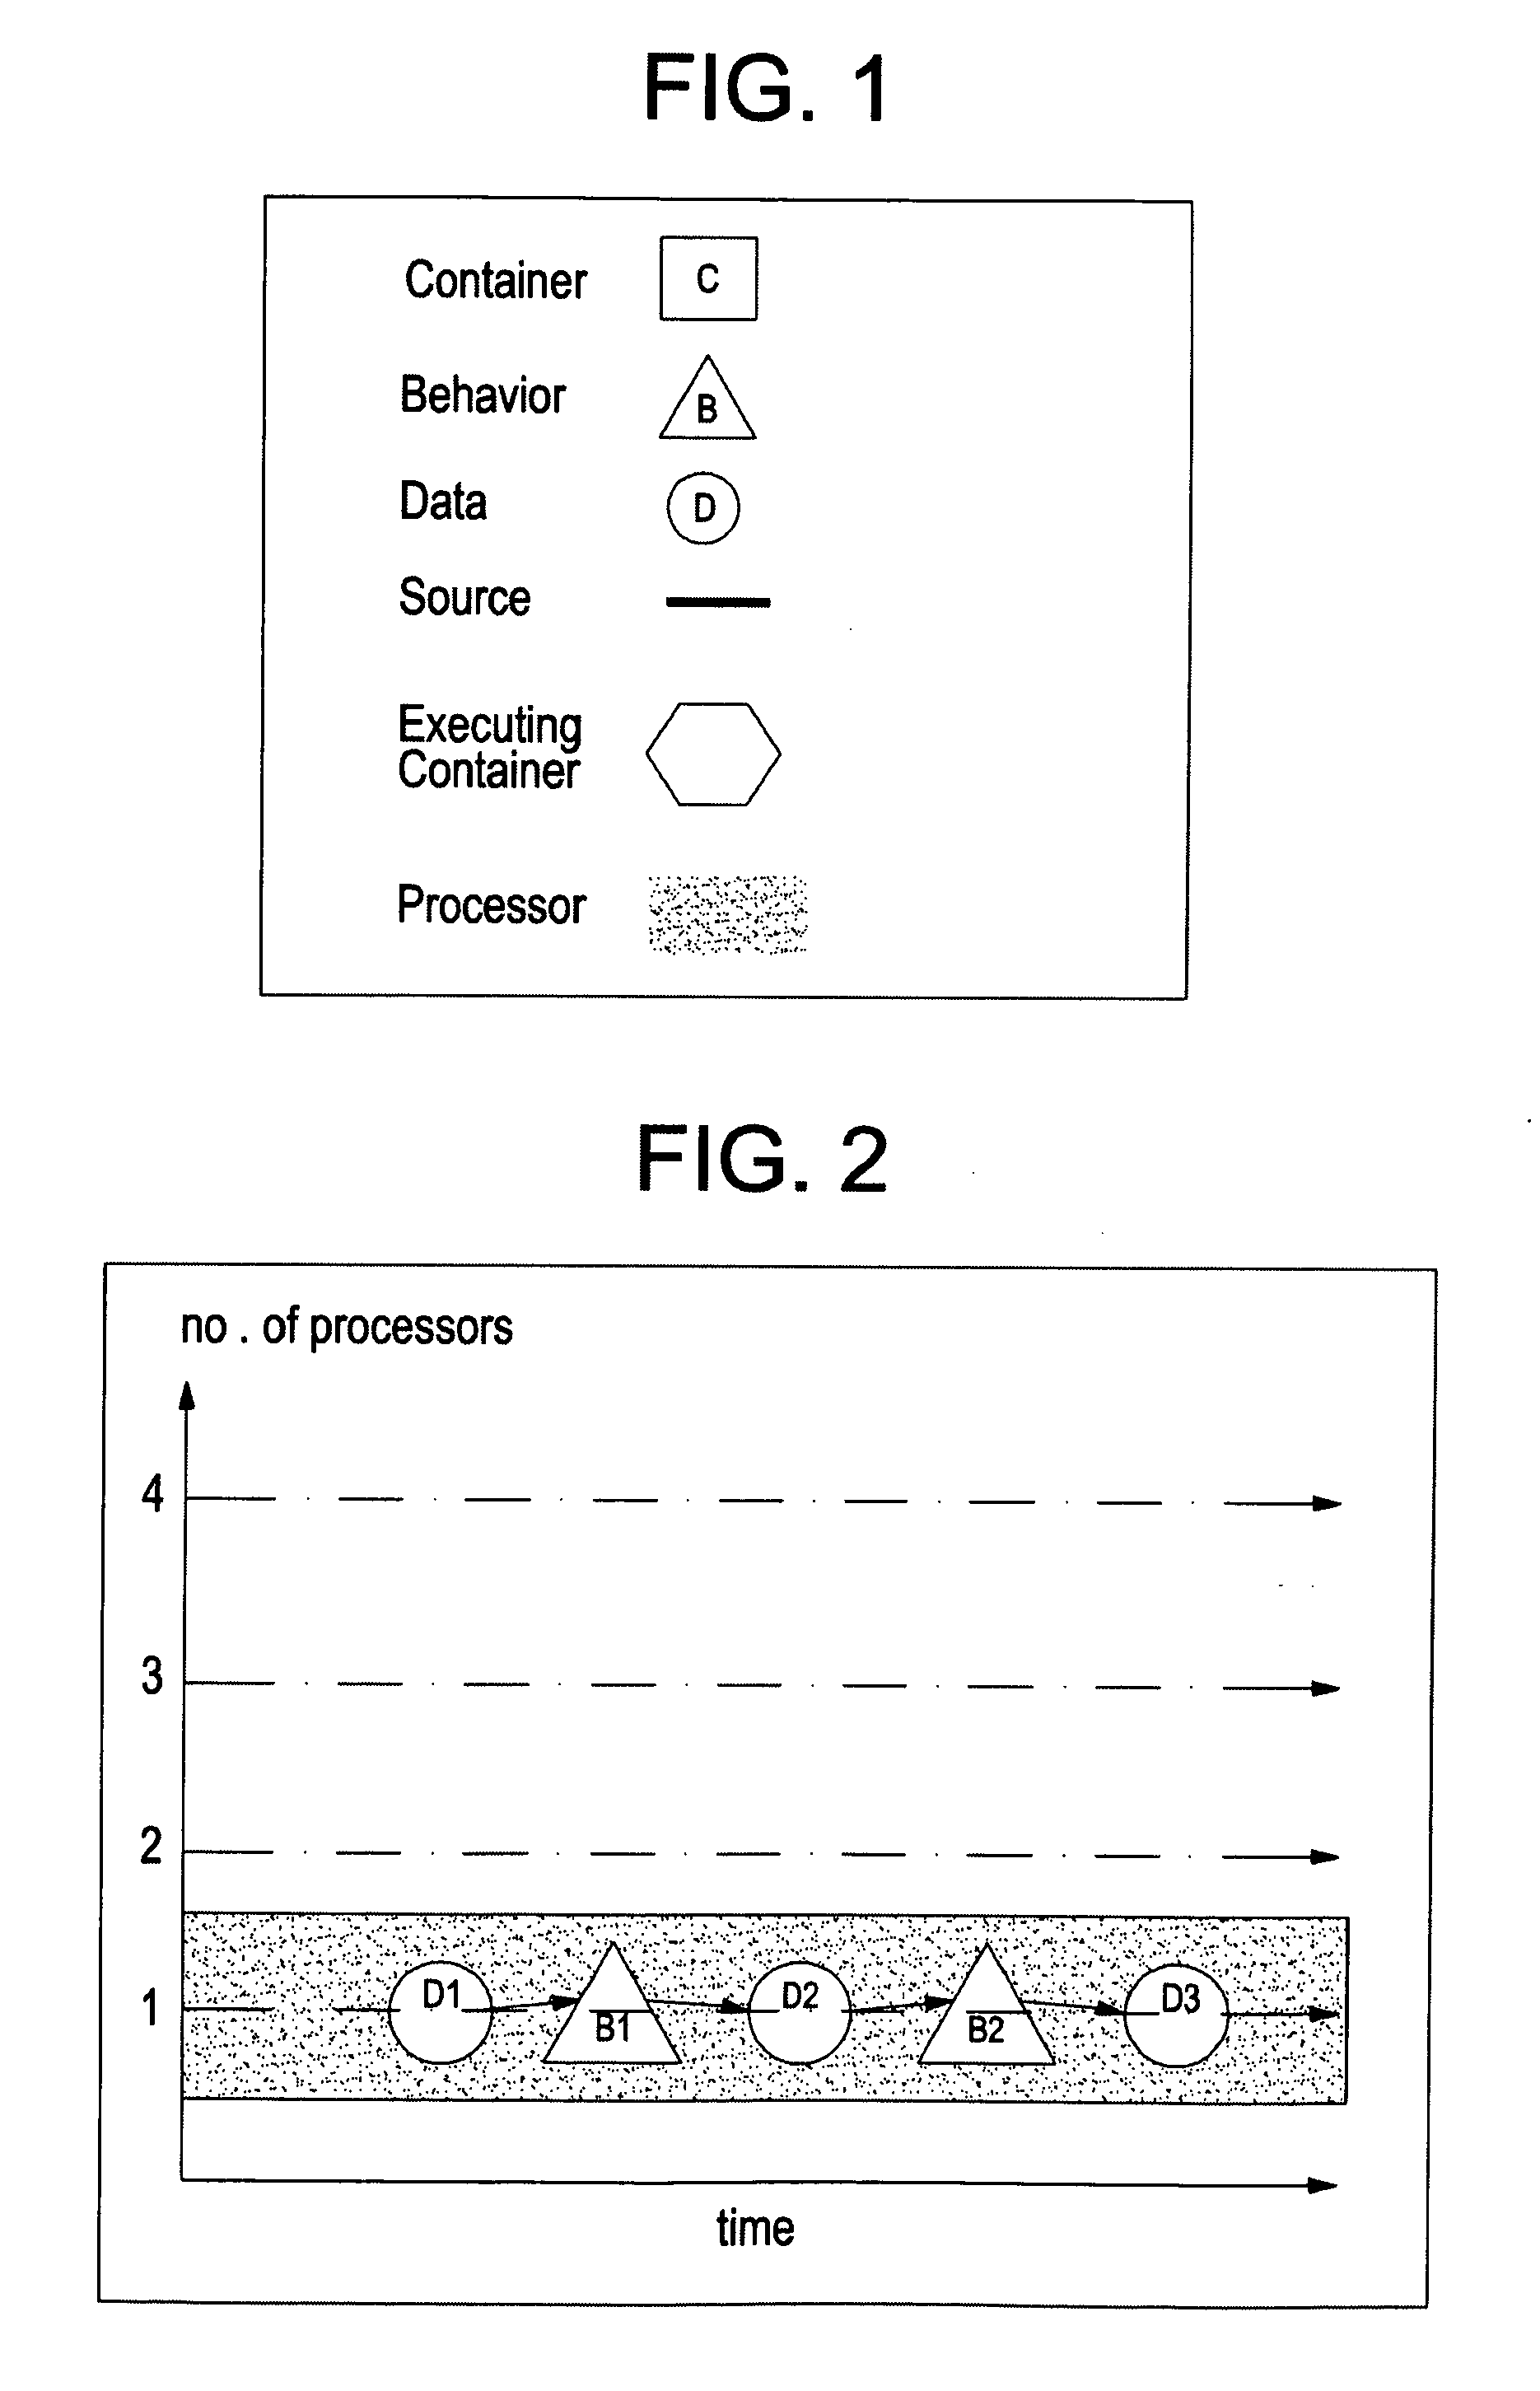 Method and system for reactively assigning computational threads of control between processors